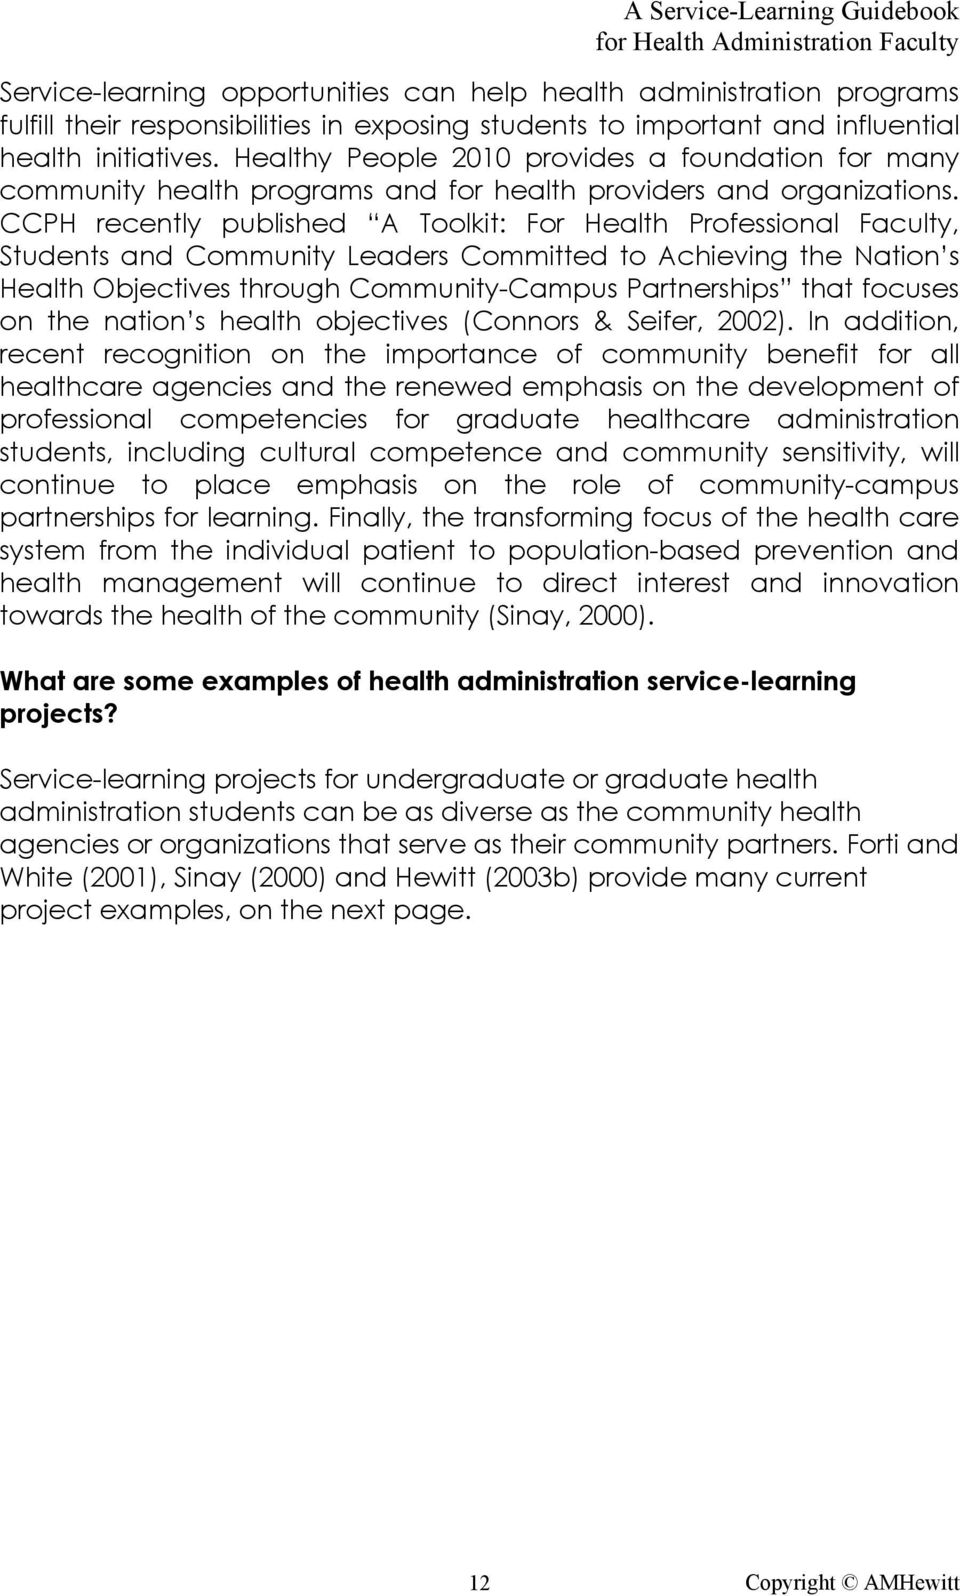 CCPH recently published A Toolkit: For Health Professional Faculty, Students and Community Leaders Committed to Achieving the Nation s Health Objectives through Community-Campus Partnerships that